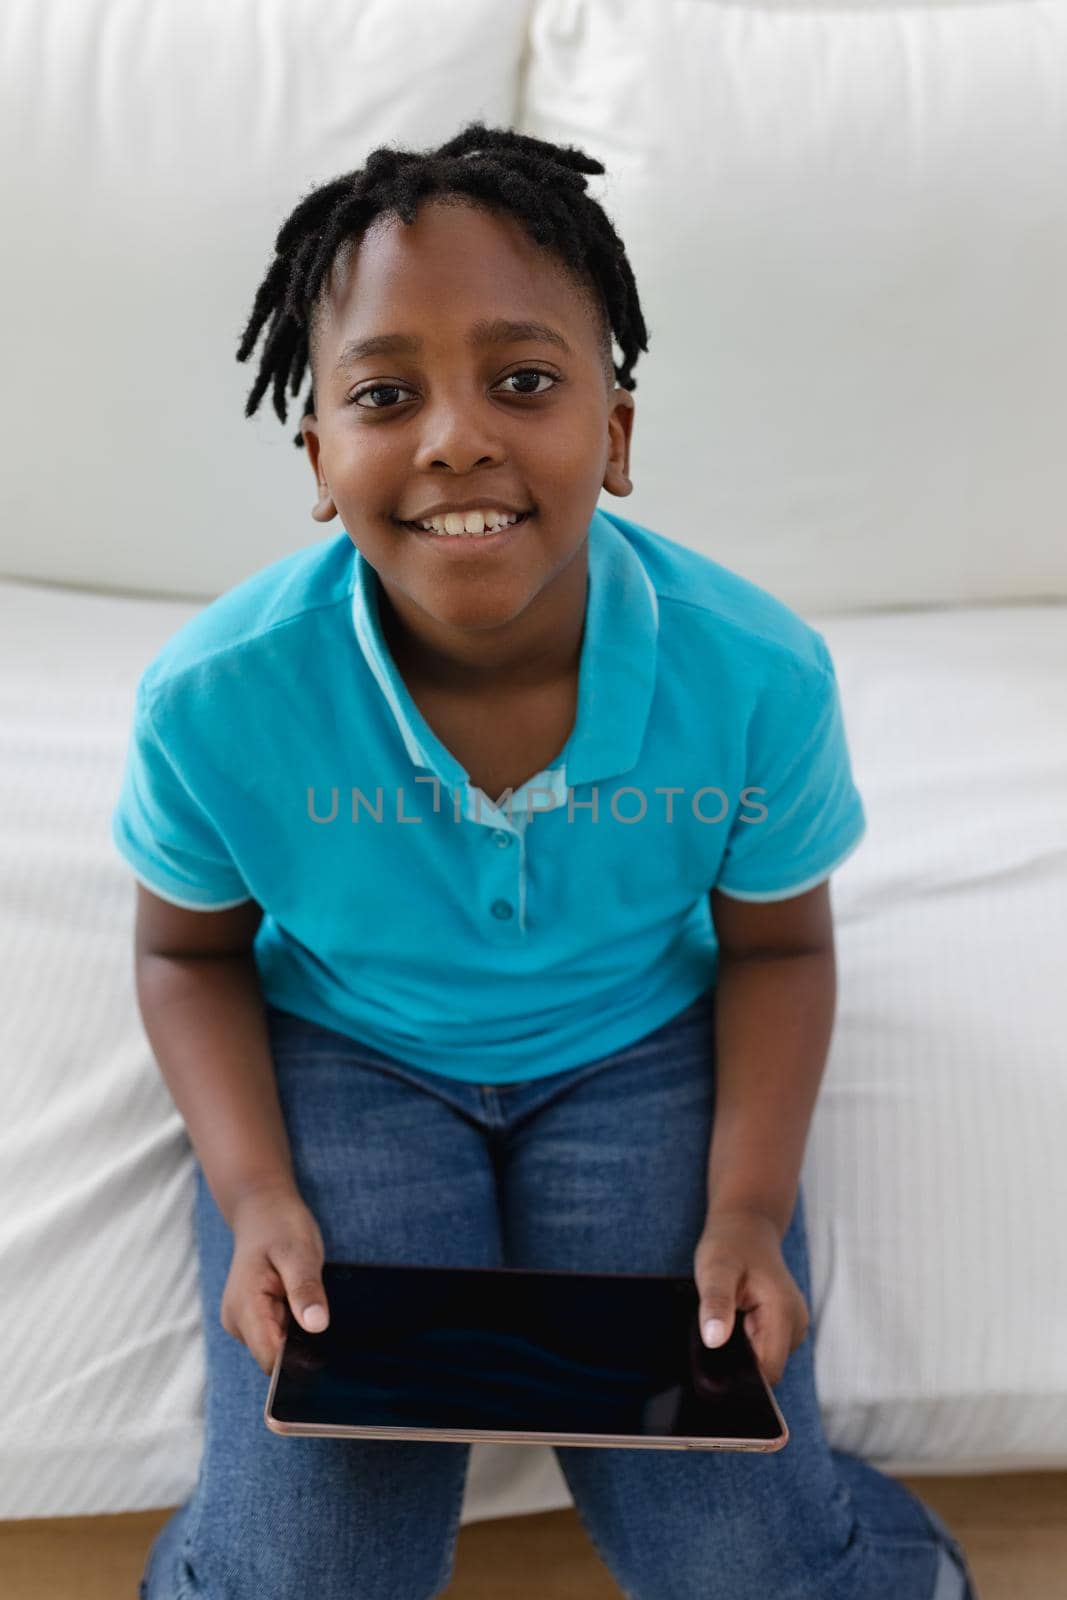 Portrait of smiling african american boy with short dreadlocks sitting on couch using digital tablet by Wavebreakmedia